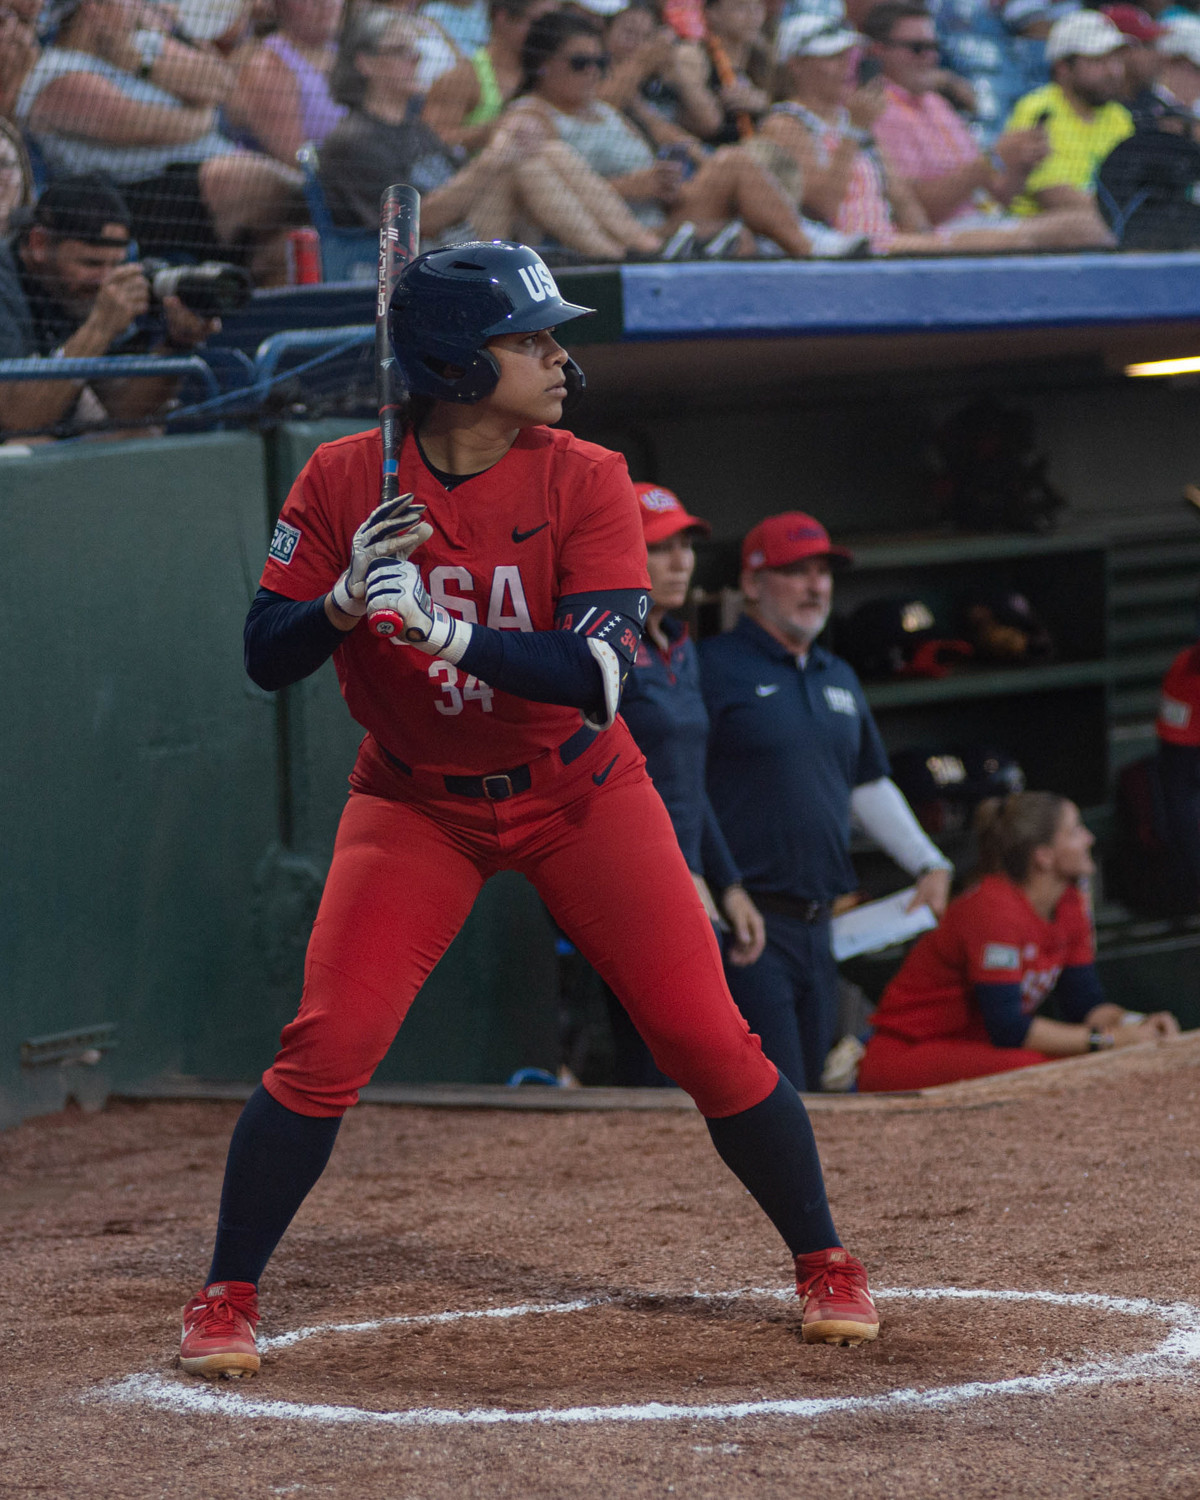 Dejah Mulipola of the United States was named the best catcher in the women's softball tournament ©The World Games 2022